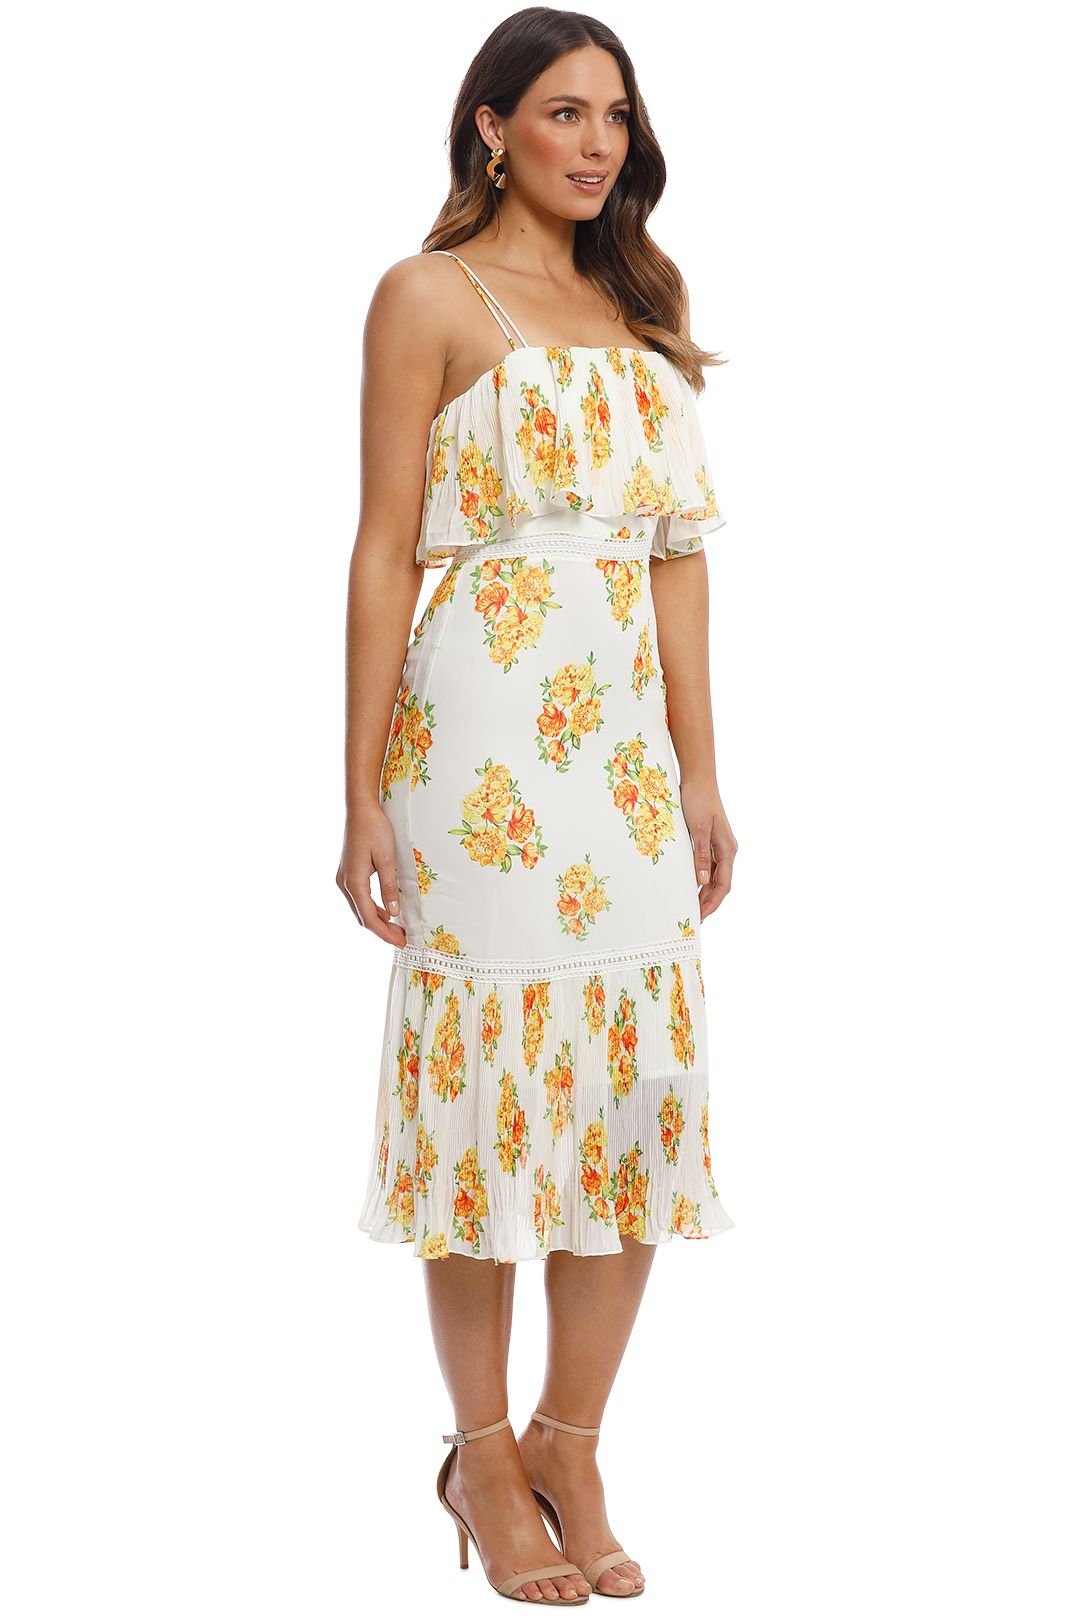 Cooper St - Darjeeling Fitted Layered Dress - Ivory Print - Side